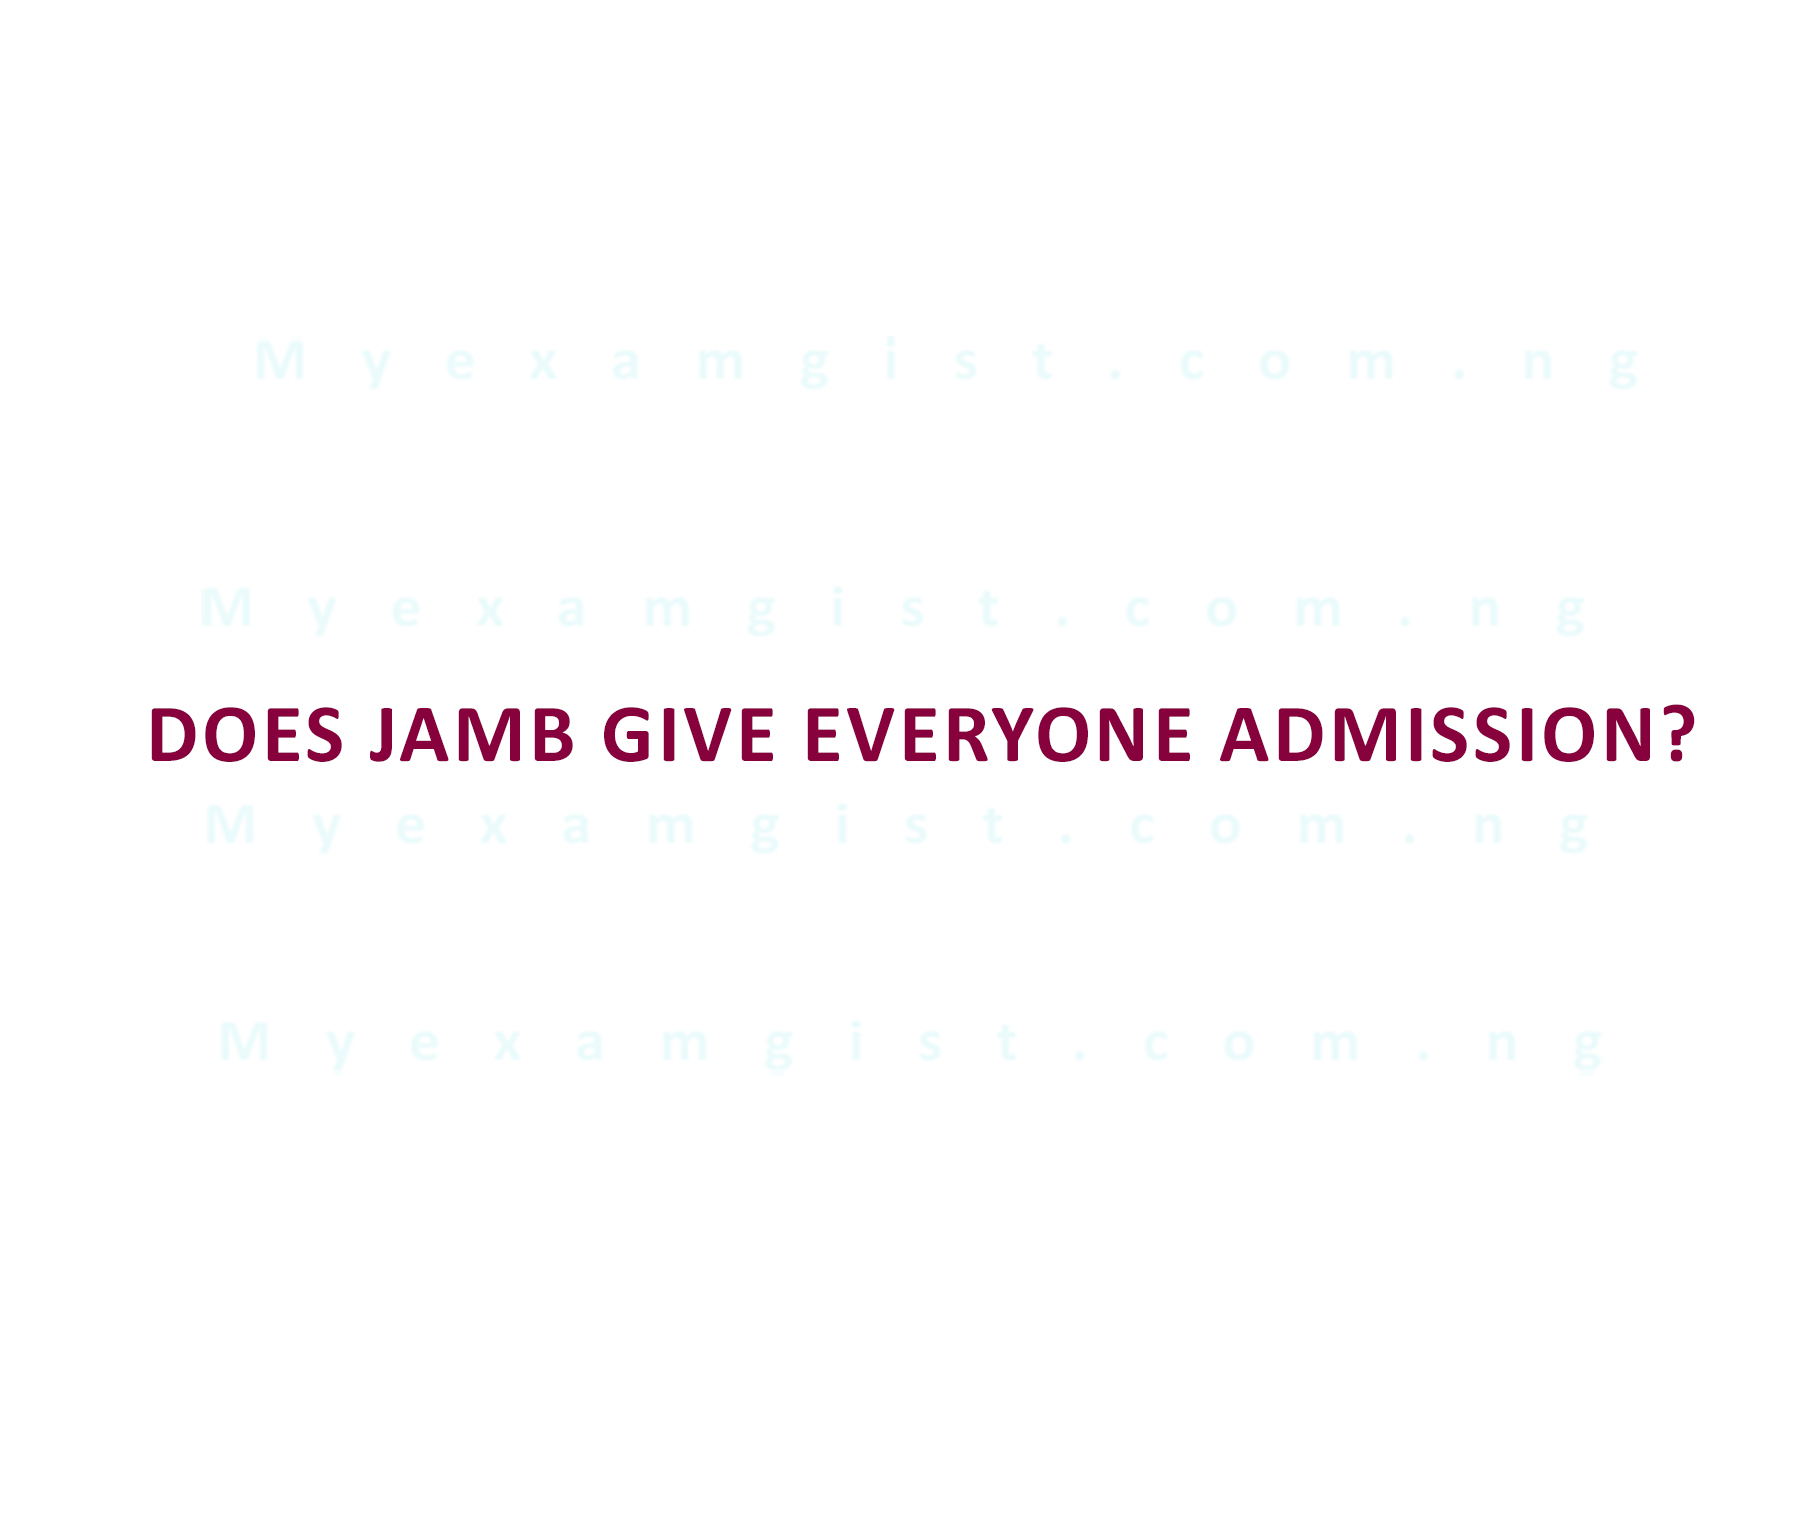 Does JAMB give everyone admission